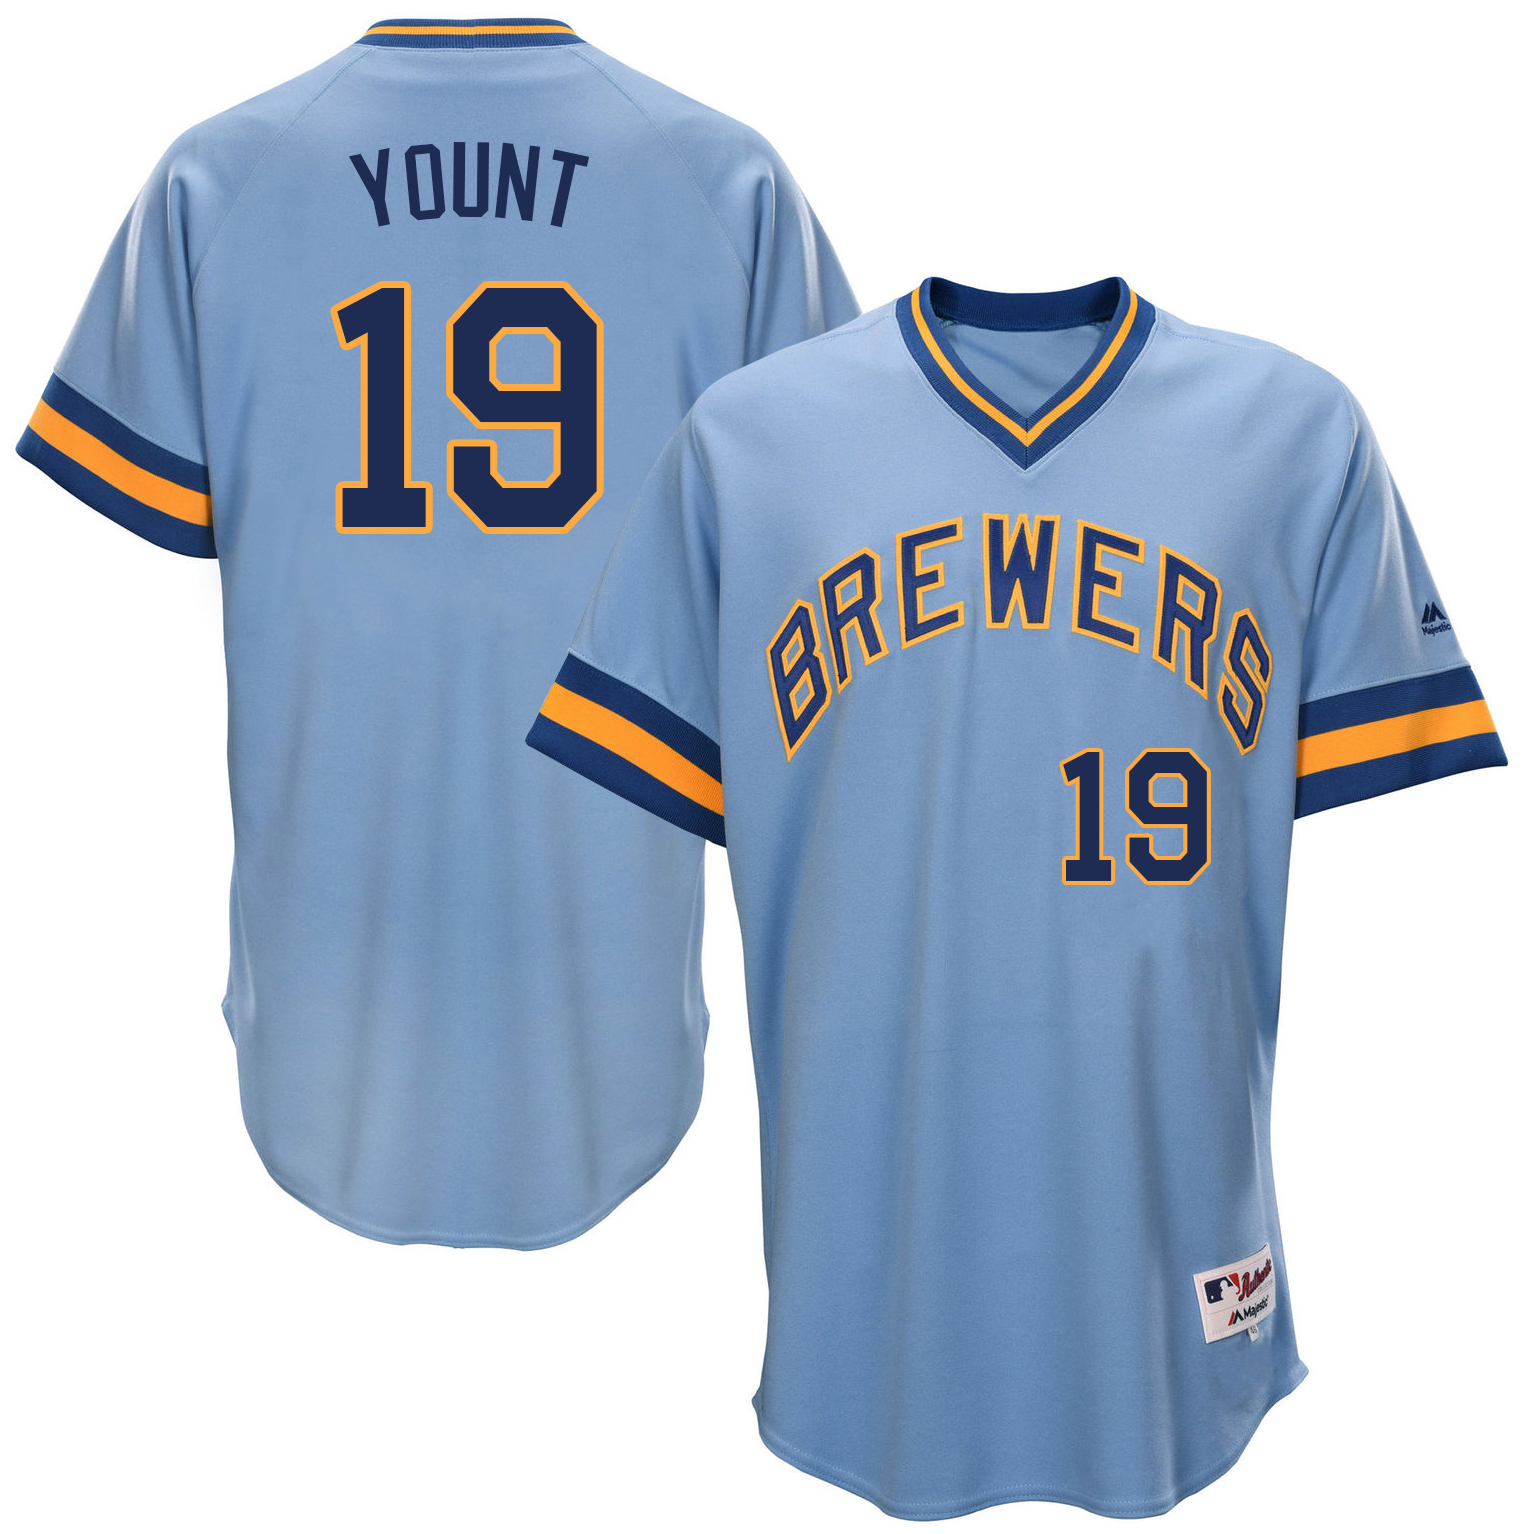 Brewers 19 Robin Yount Light Blue Throwback Jersey